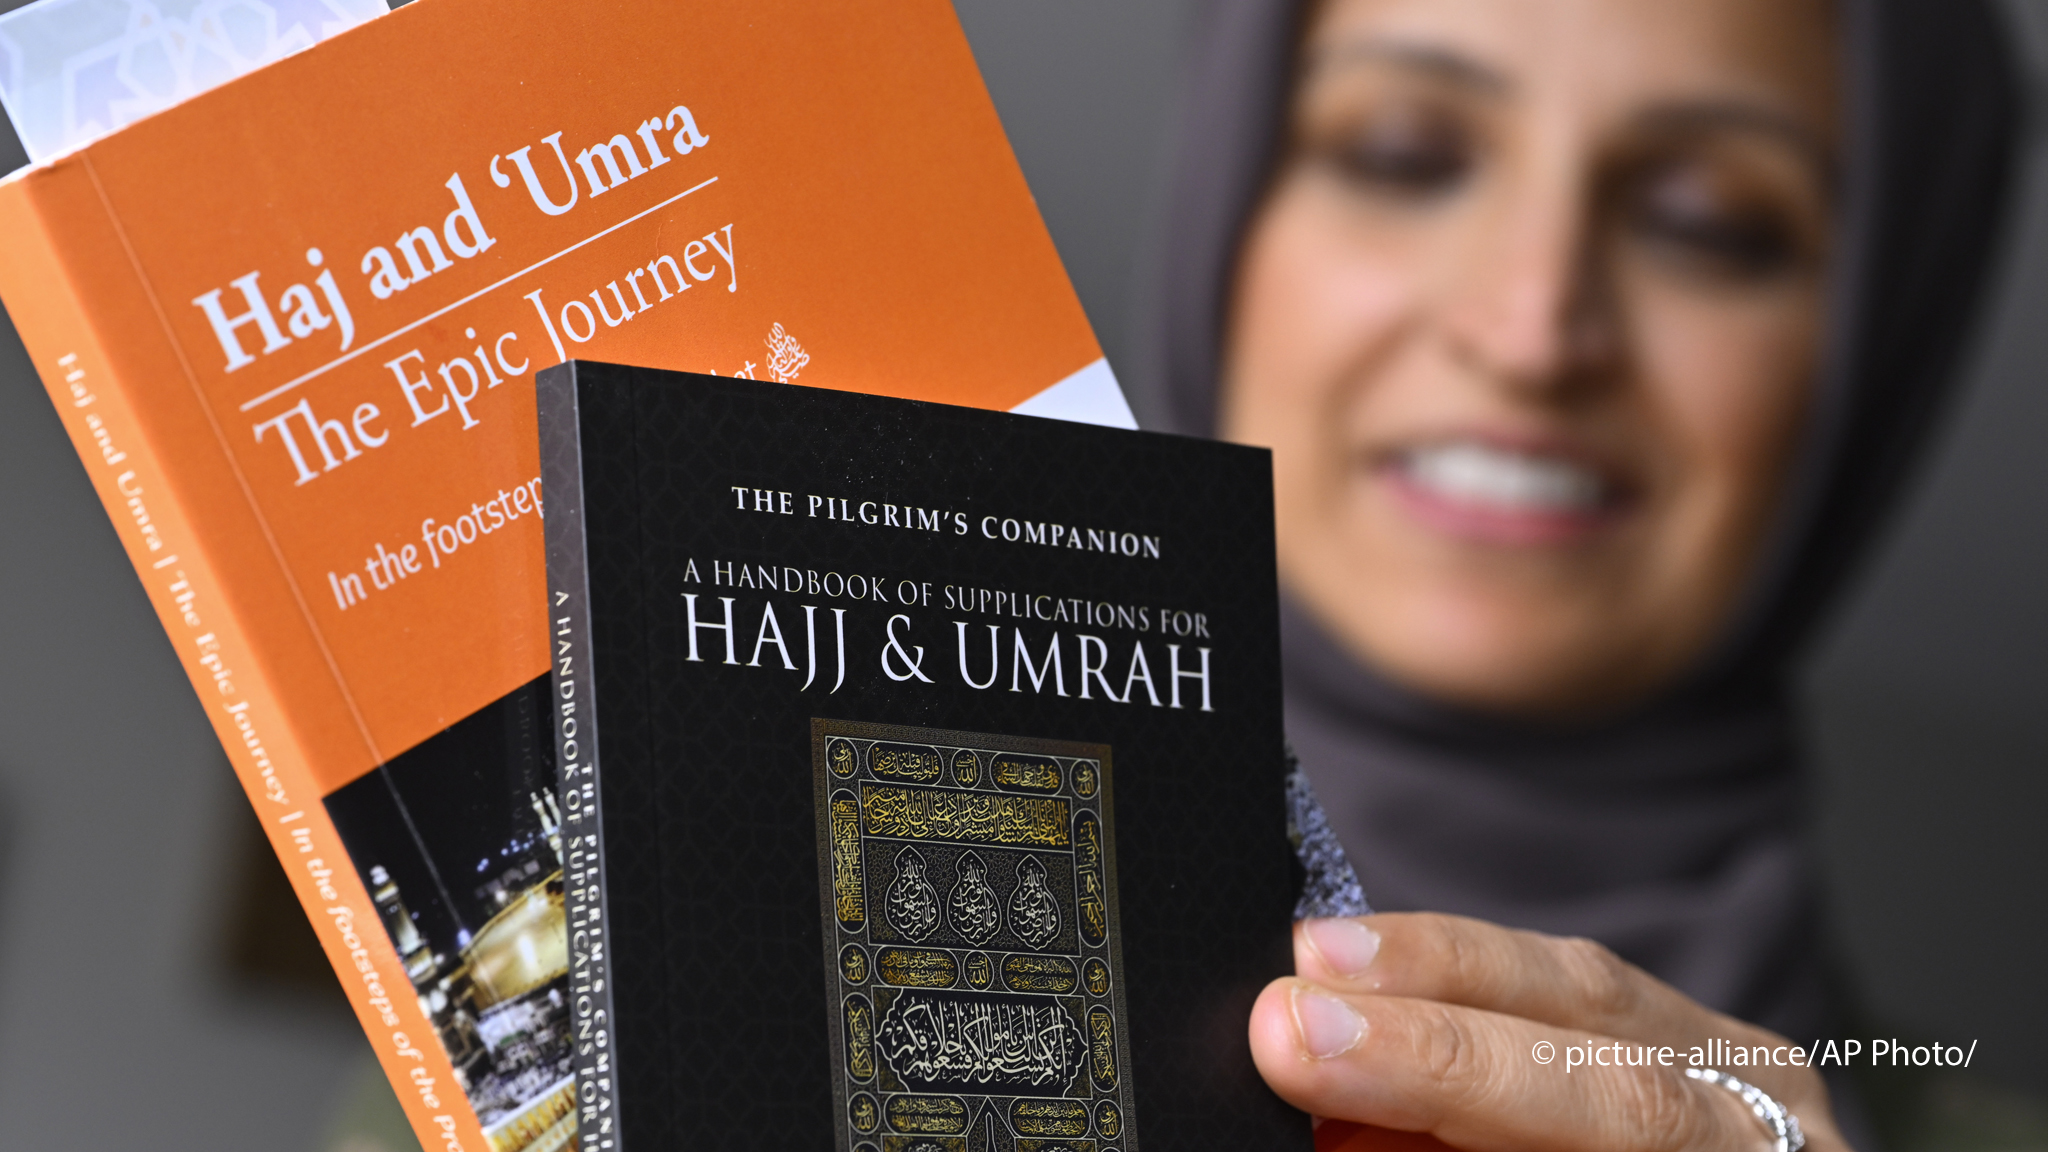 Muslim family member Saadiha Khaliq holds material which she read in preparing for her upcoming trip to hajj, pictured Wednesday, June. 7, 2023, in Murfreesboro, Tenn. The Khaliq family are planning to travel together to Mecca in Saudi Arabia for hajj, the pilgrimage which every adult Muslim who can afford it and is physically able, must make at least once in his or her lifetime. The hajj is the fifth of the fundamental Muslim practices and institutions known as the Five Pillars of Islam (image: AP Photo/Jo